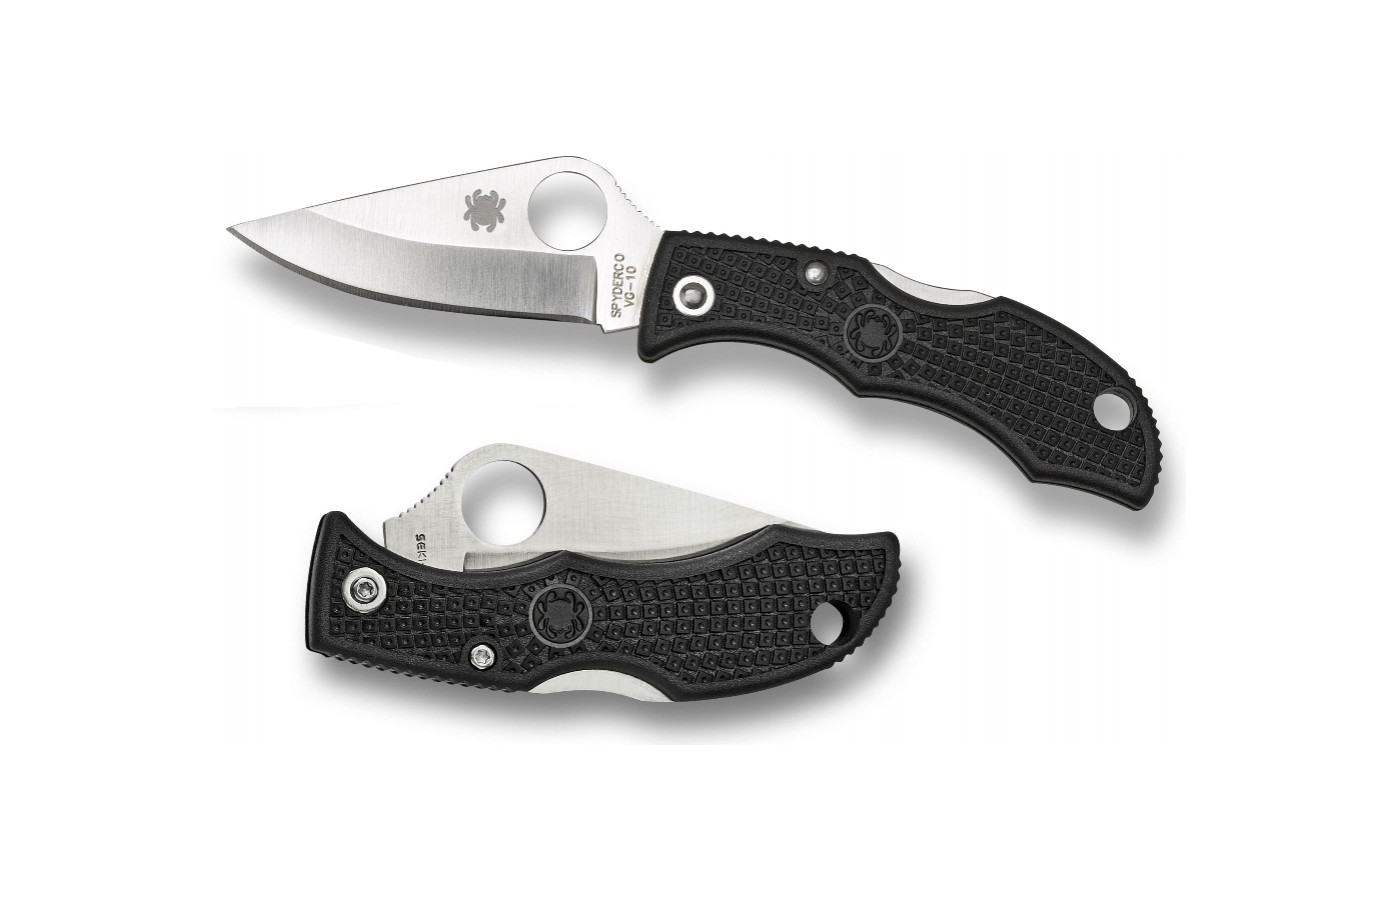 Spyderco offers this knife with several variaions of color for the handle.